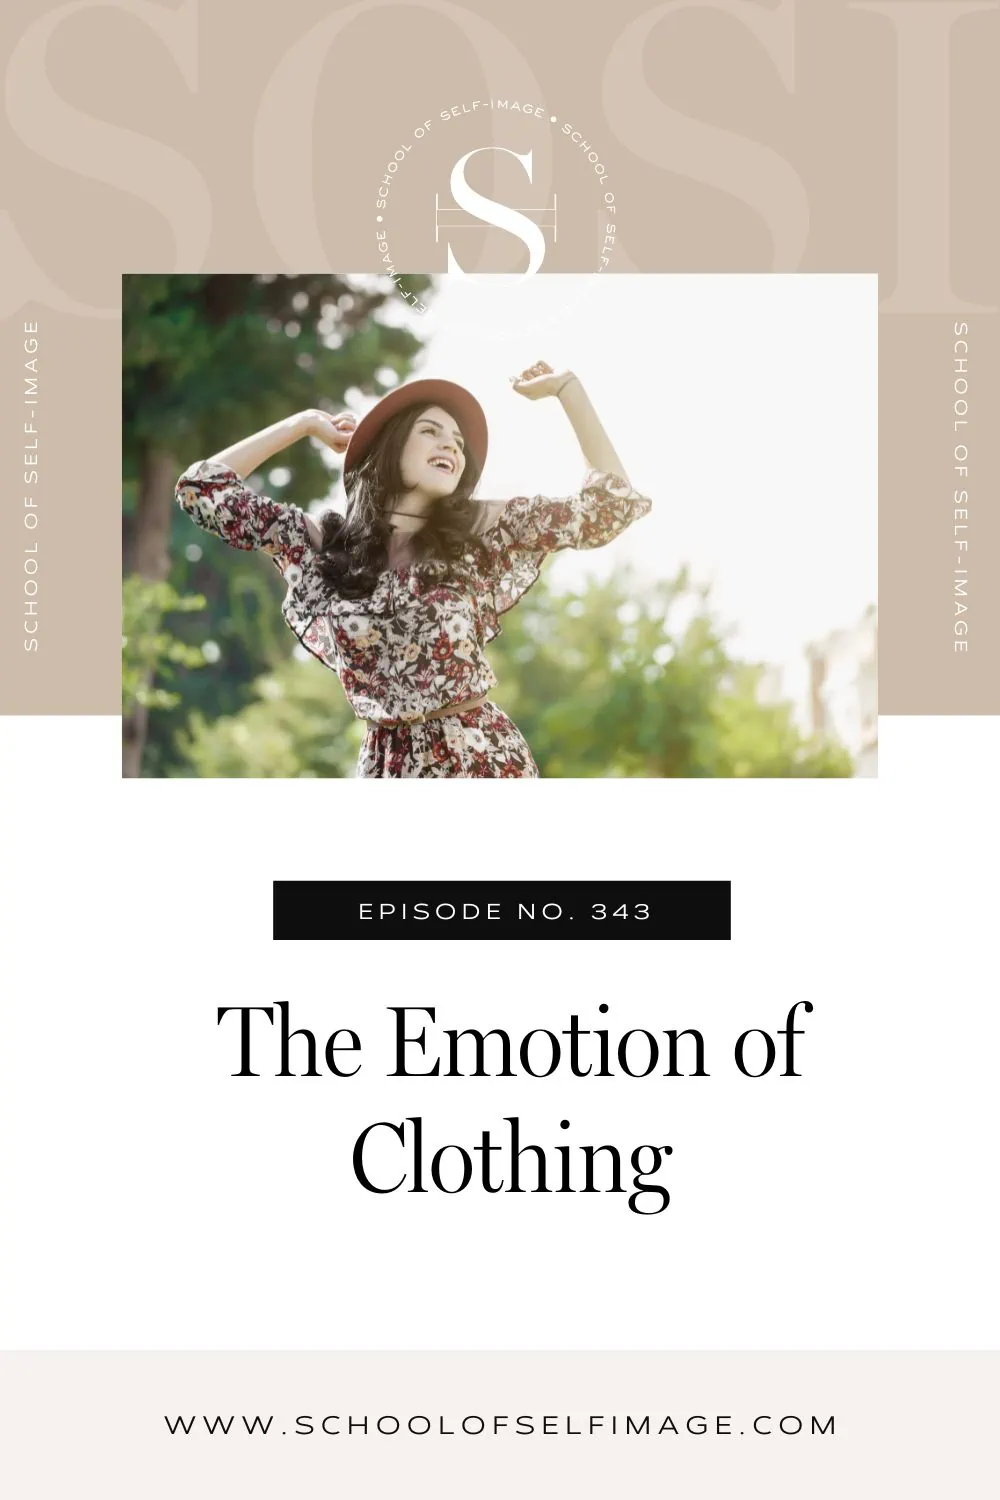 The Emotion of Clothing